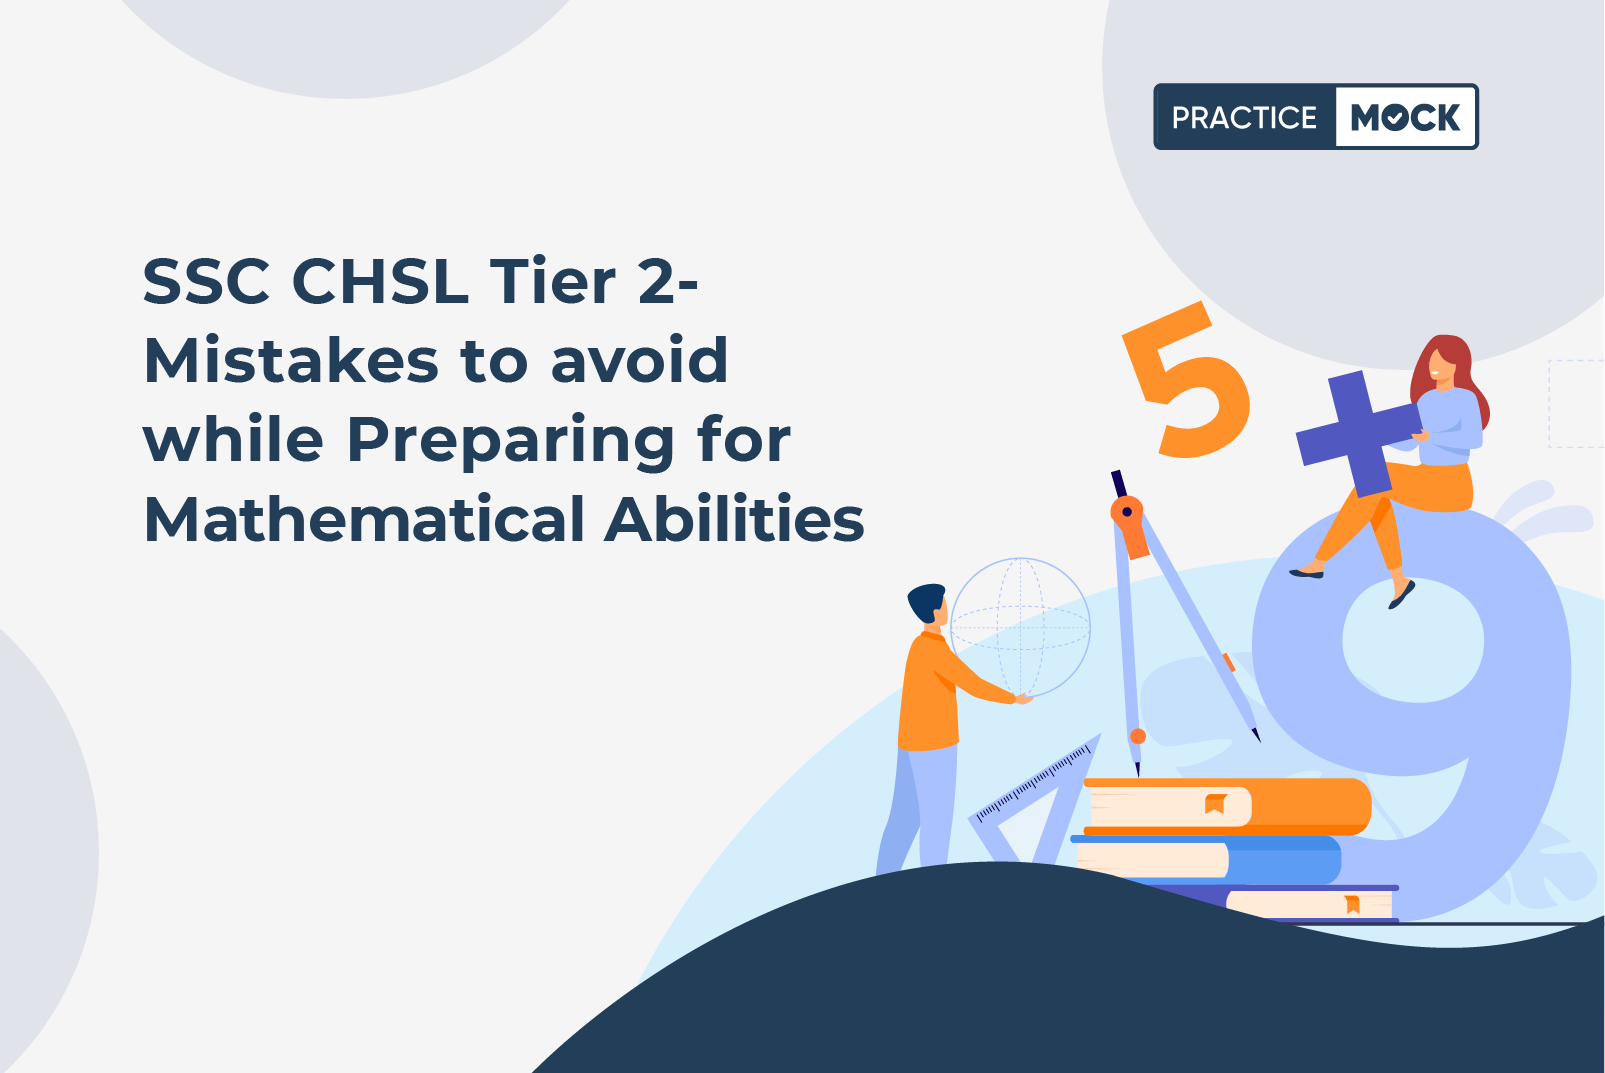 Mistakes to avoid while Preparing for Mathematical Abilities for SSC CHSL Tier 2